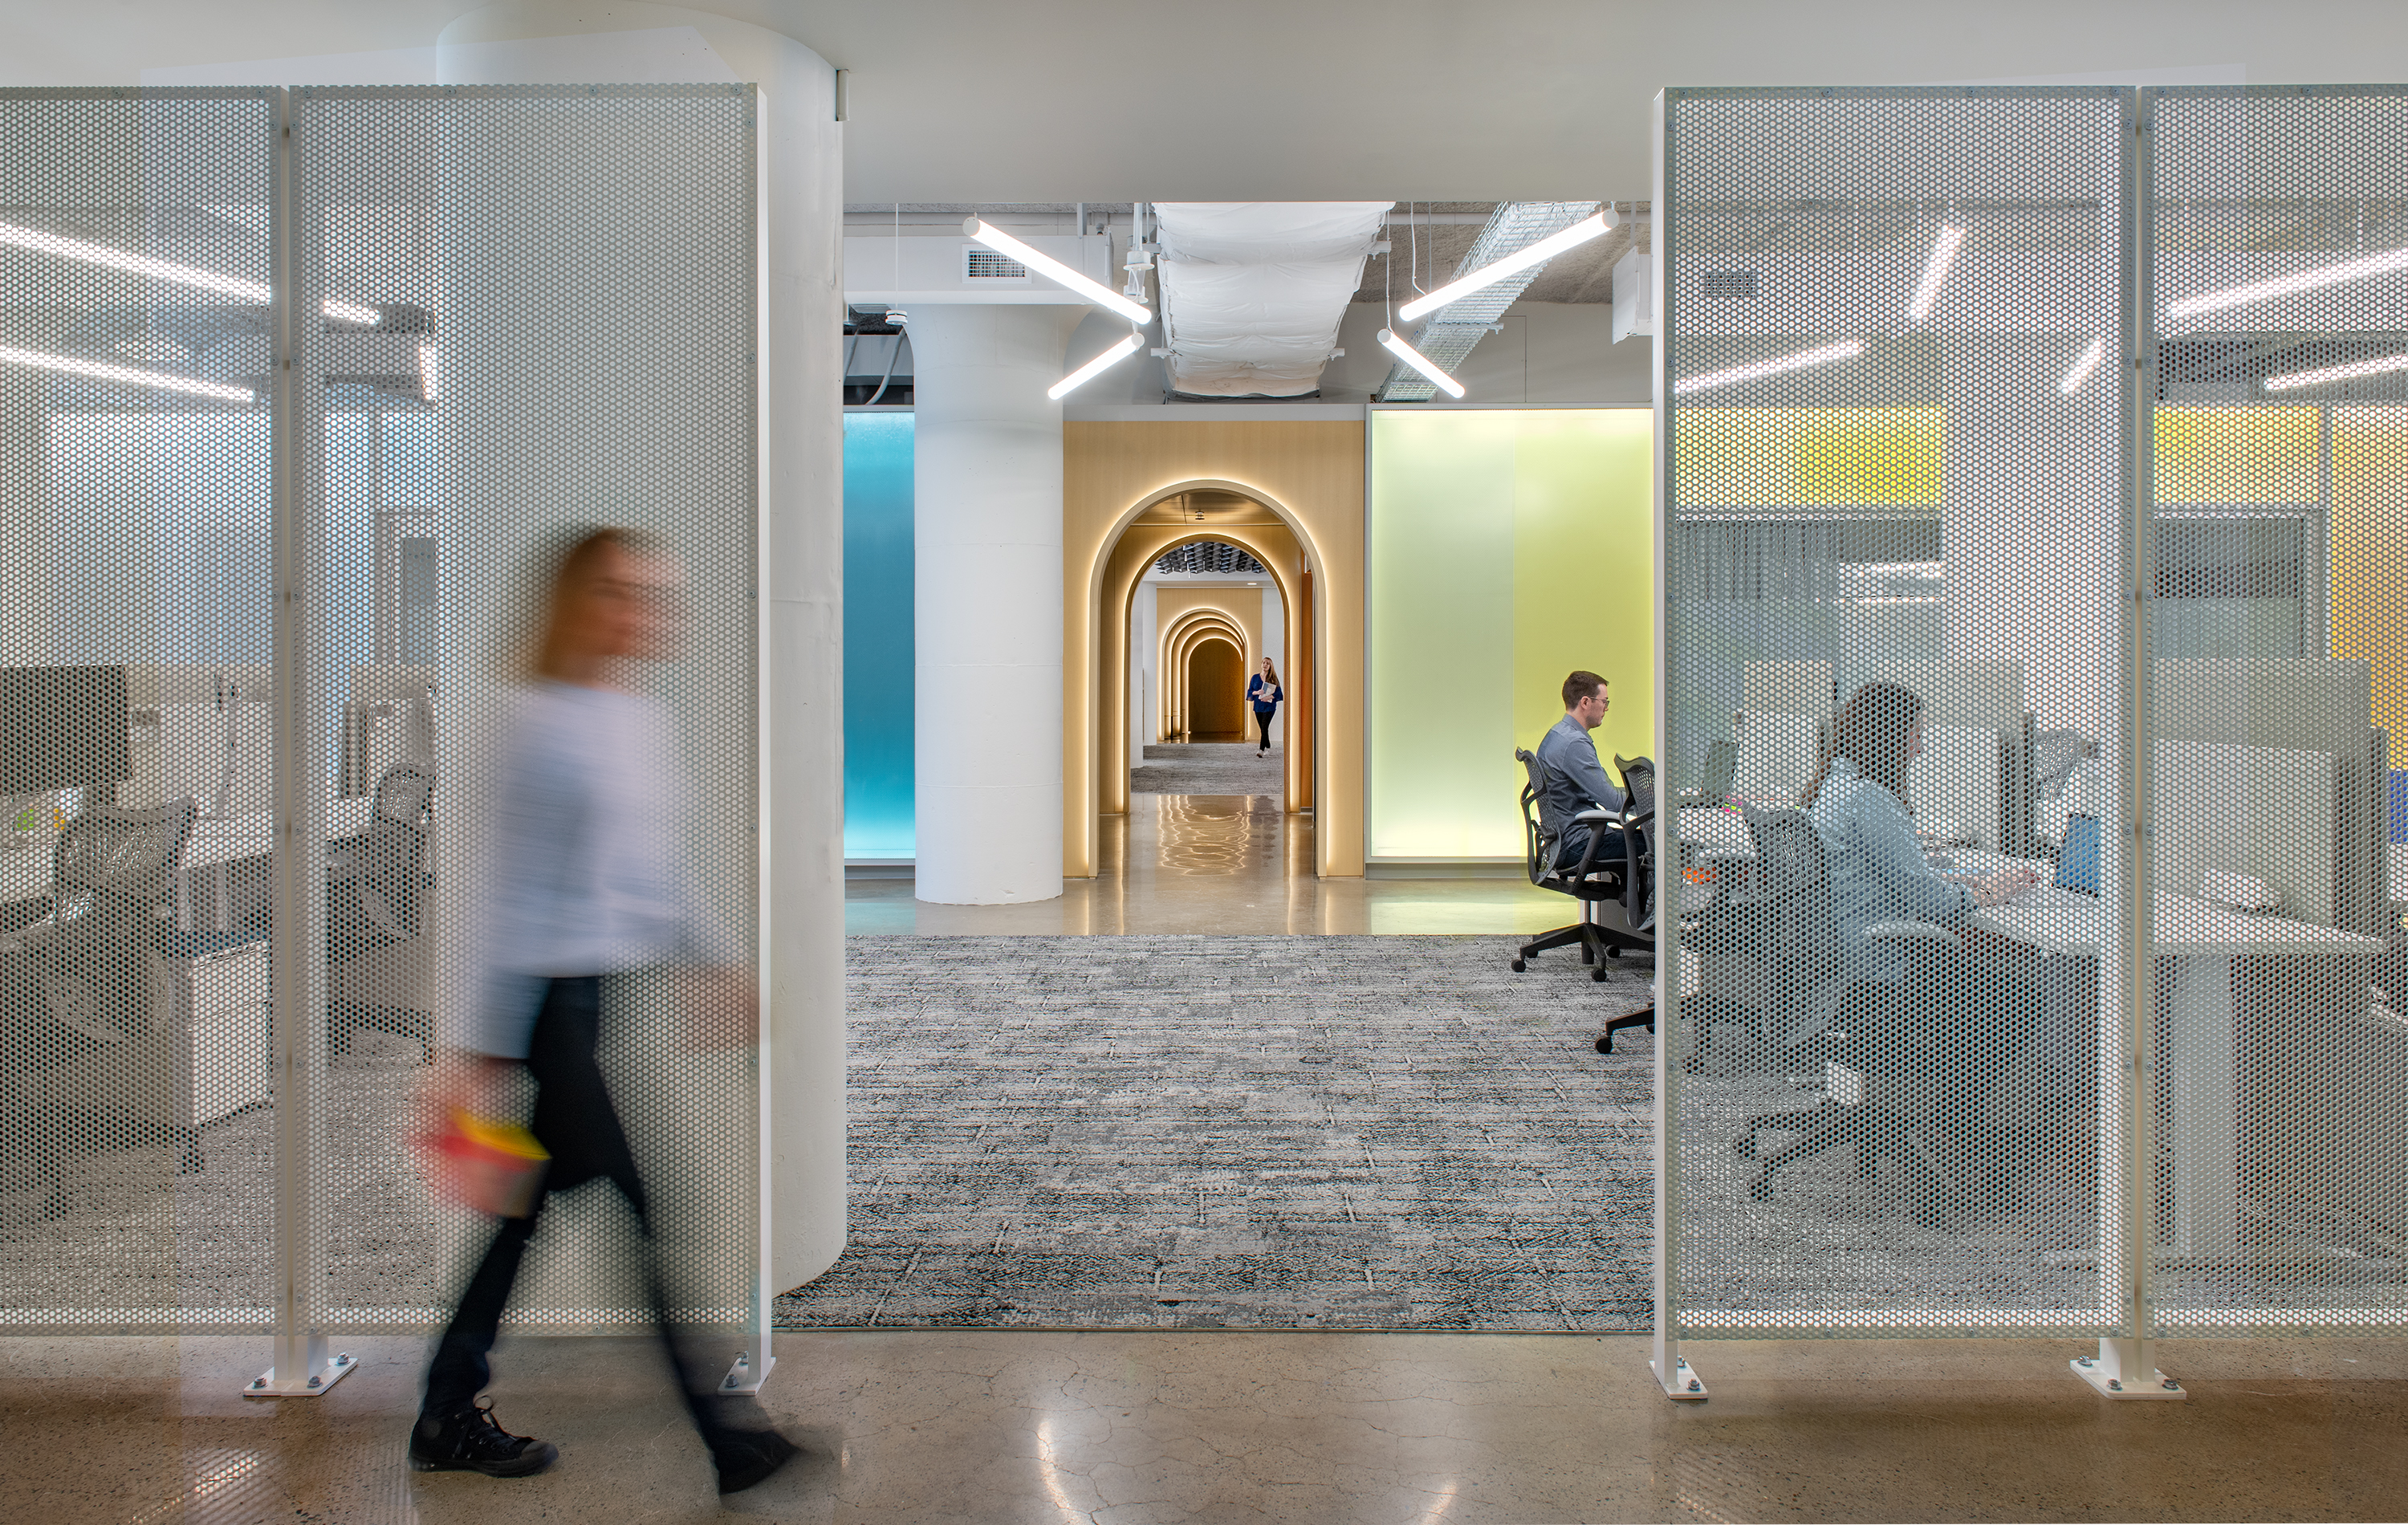 Utile’s Autodesk Boston Workspace Expansion featured in AN Interior!